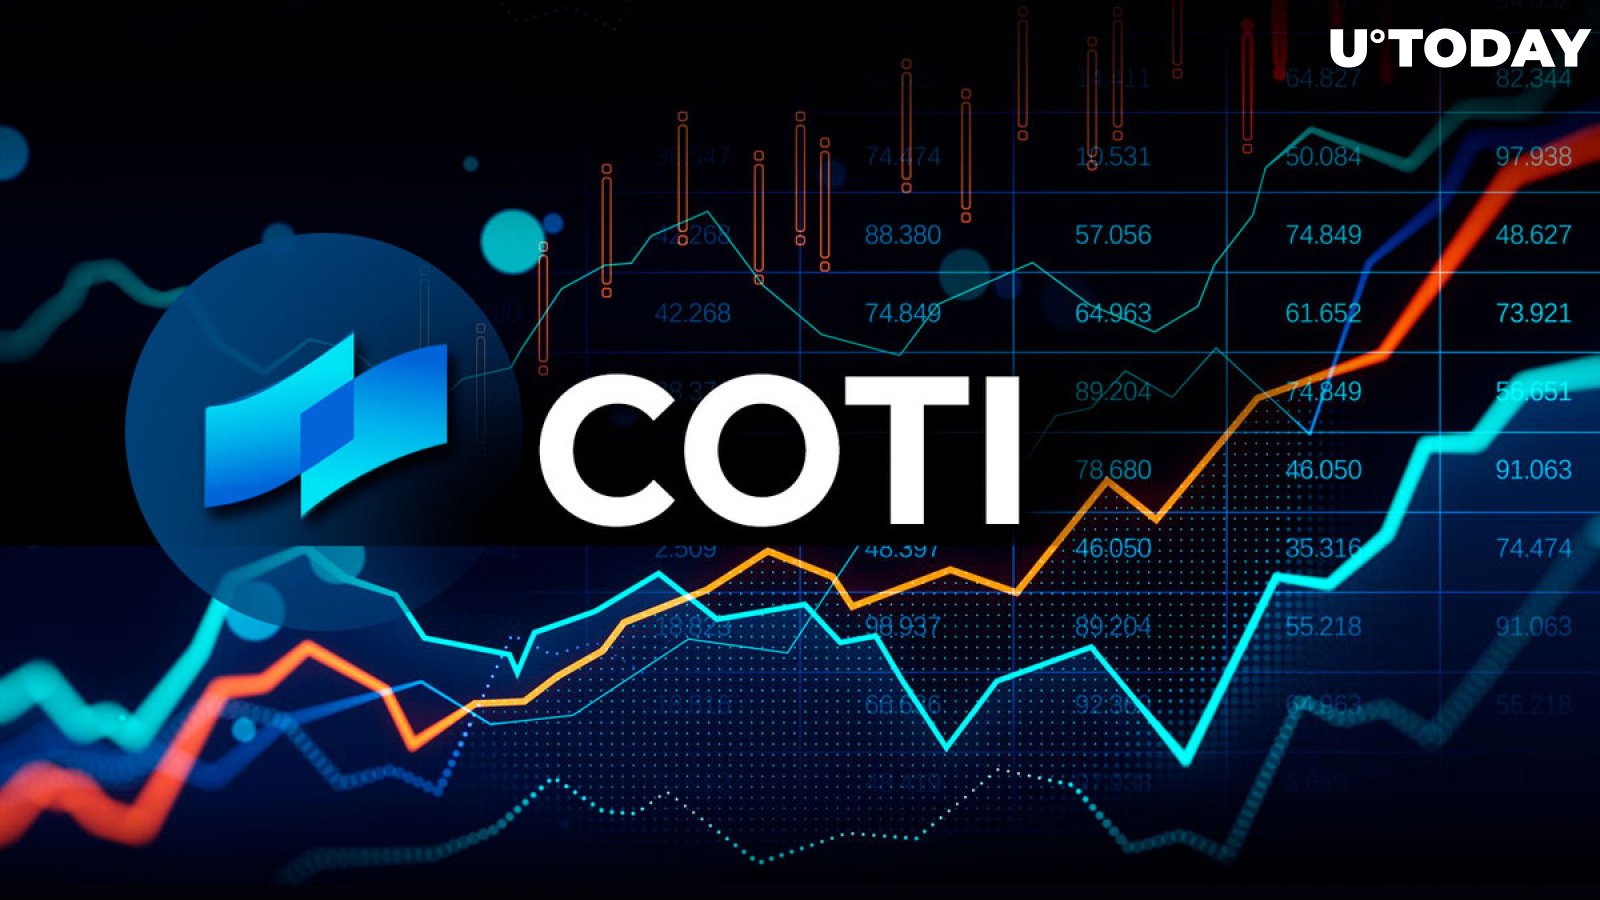 COTI (COTI) Sees 40% Price Surge Following L2 Privacy Protocol Upgrade